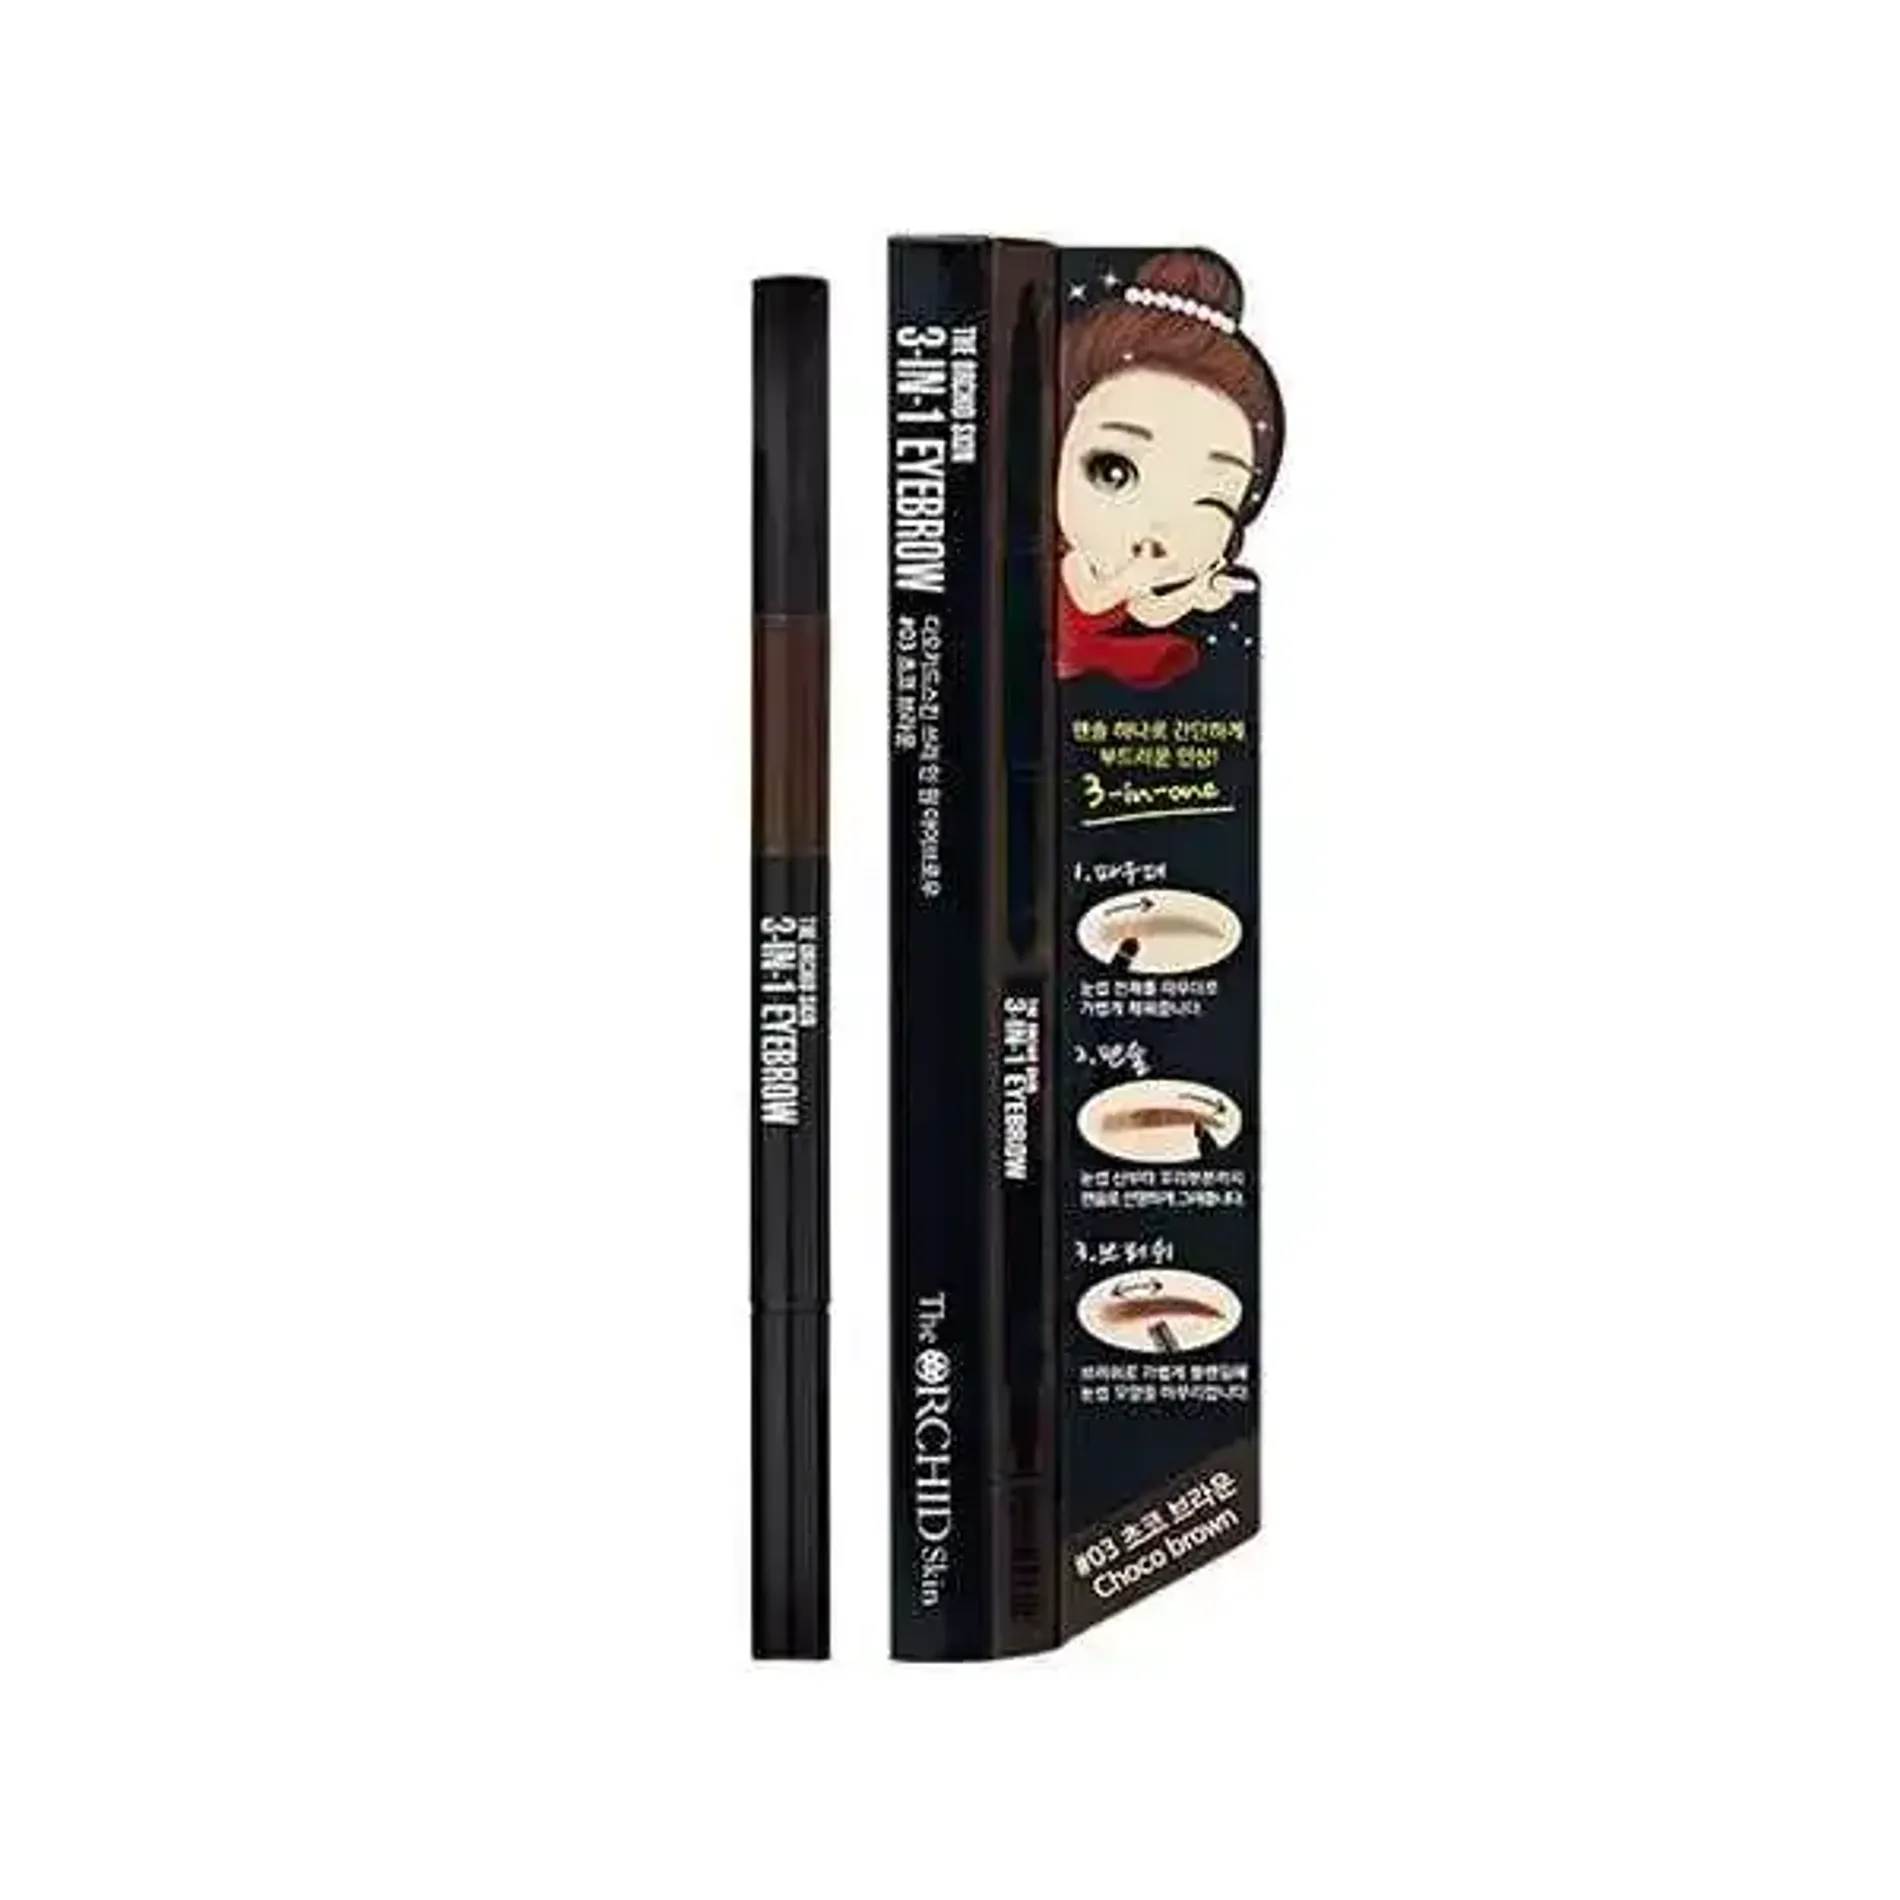 chi-ve-chan-may-the-orchid-skin-3-in-1-eyebrow-03-choco-brown-2